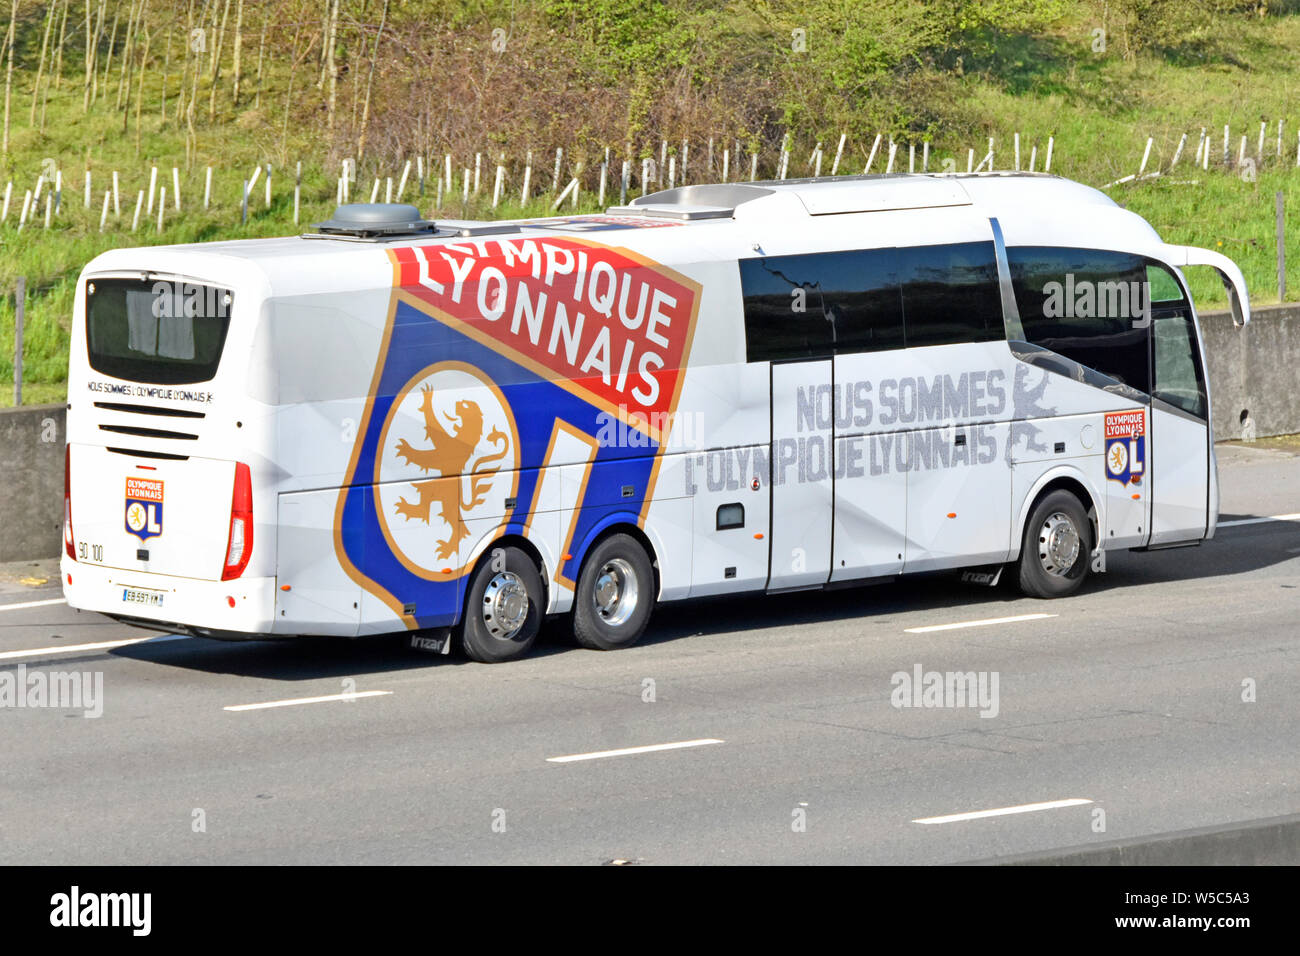 Bus transport for Olympique Lyonnais French football club based in Lyon France with logo on team coach seen driving along M25 UK motorway England UK Stock Photo